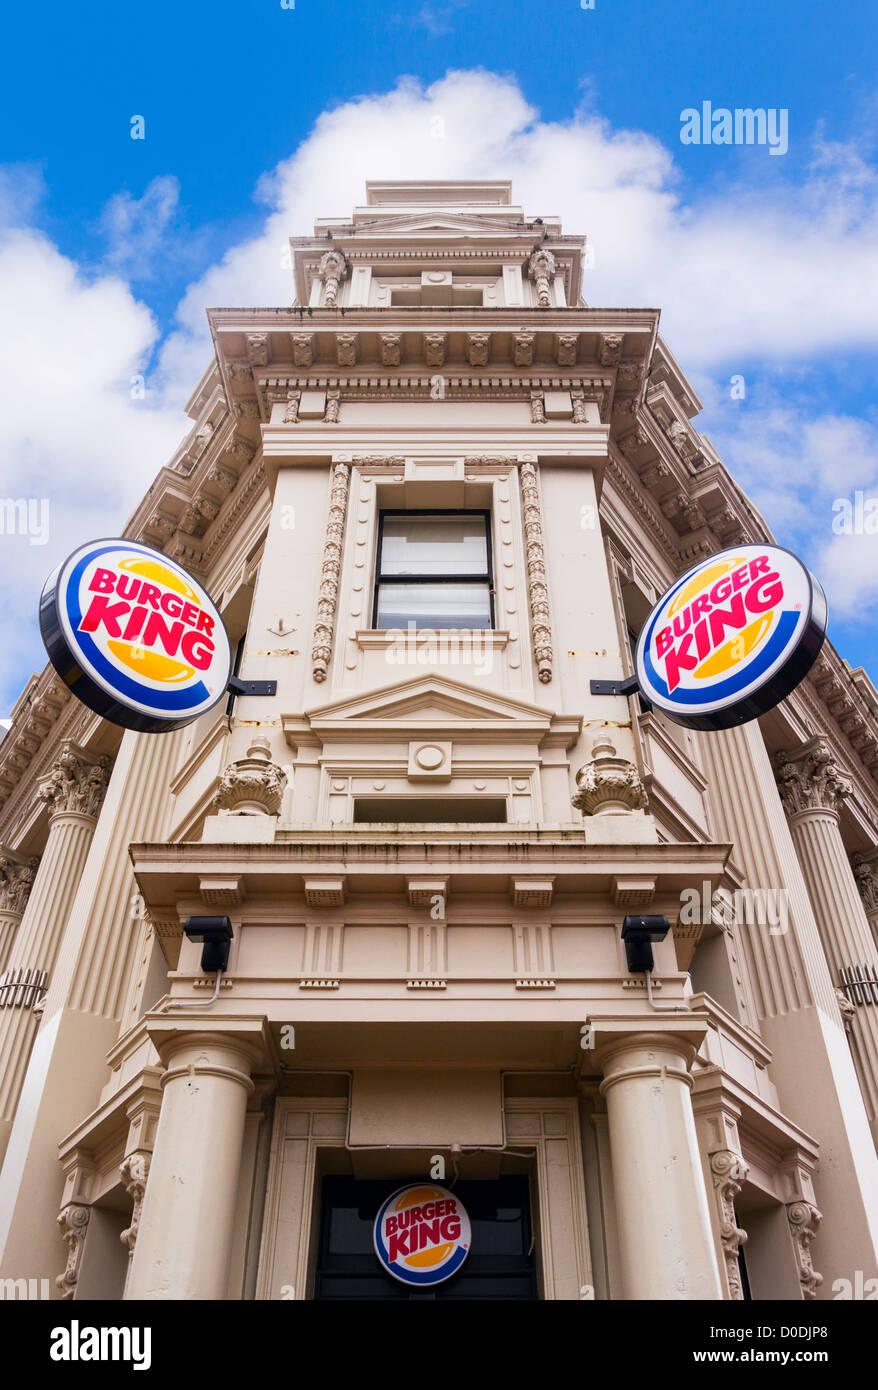 Burger King, Cuba Mall, Wellington, New Zealand, which is situated in an old heritage building, originally a bank. Stock Photo